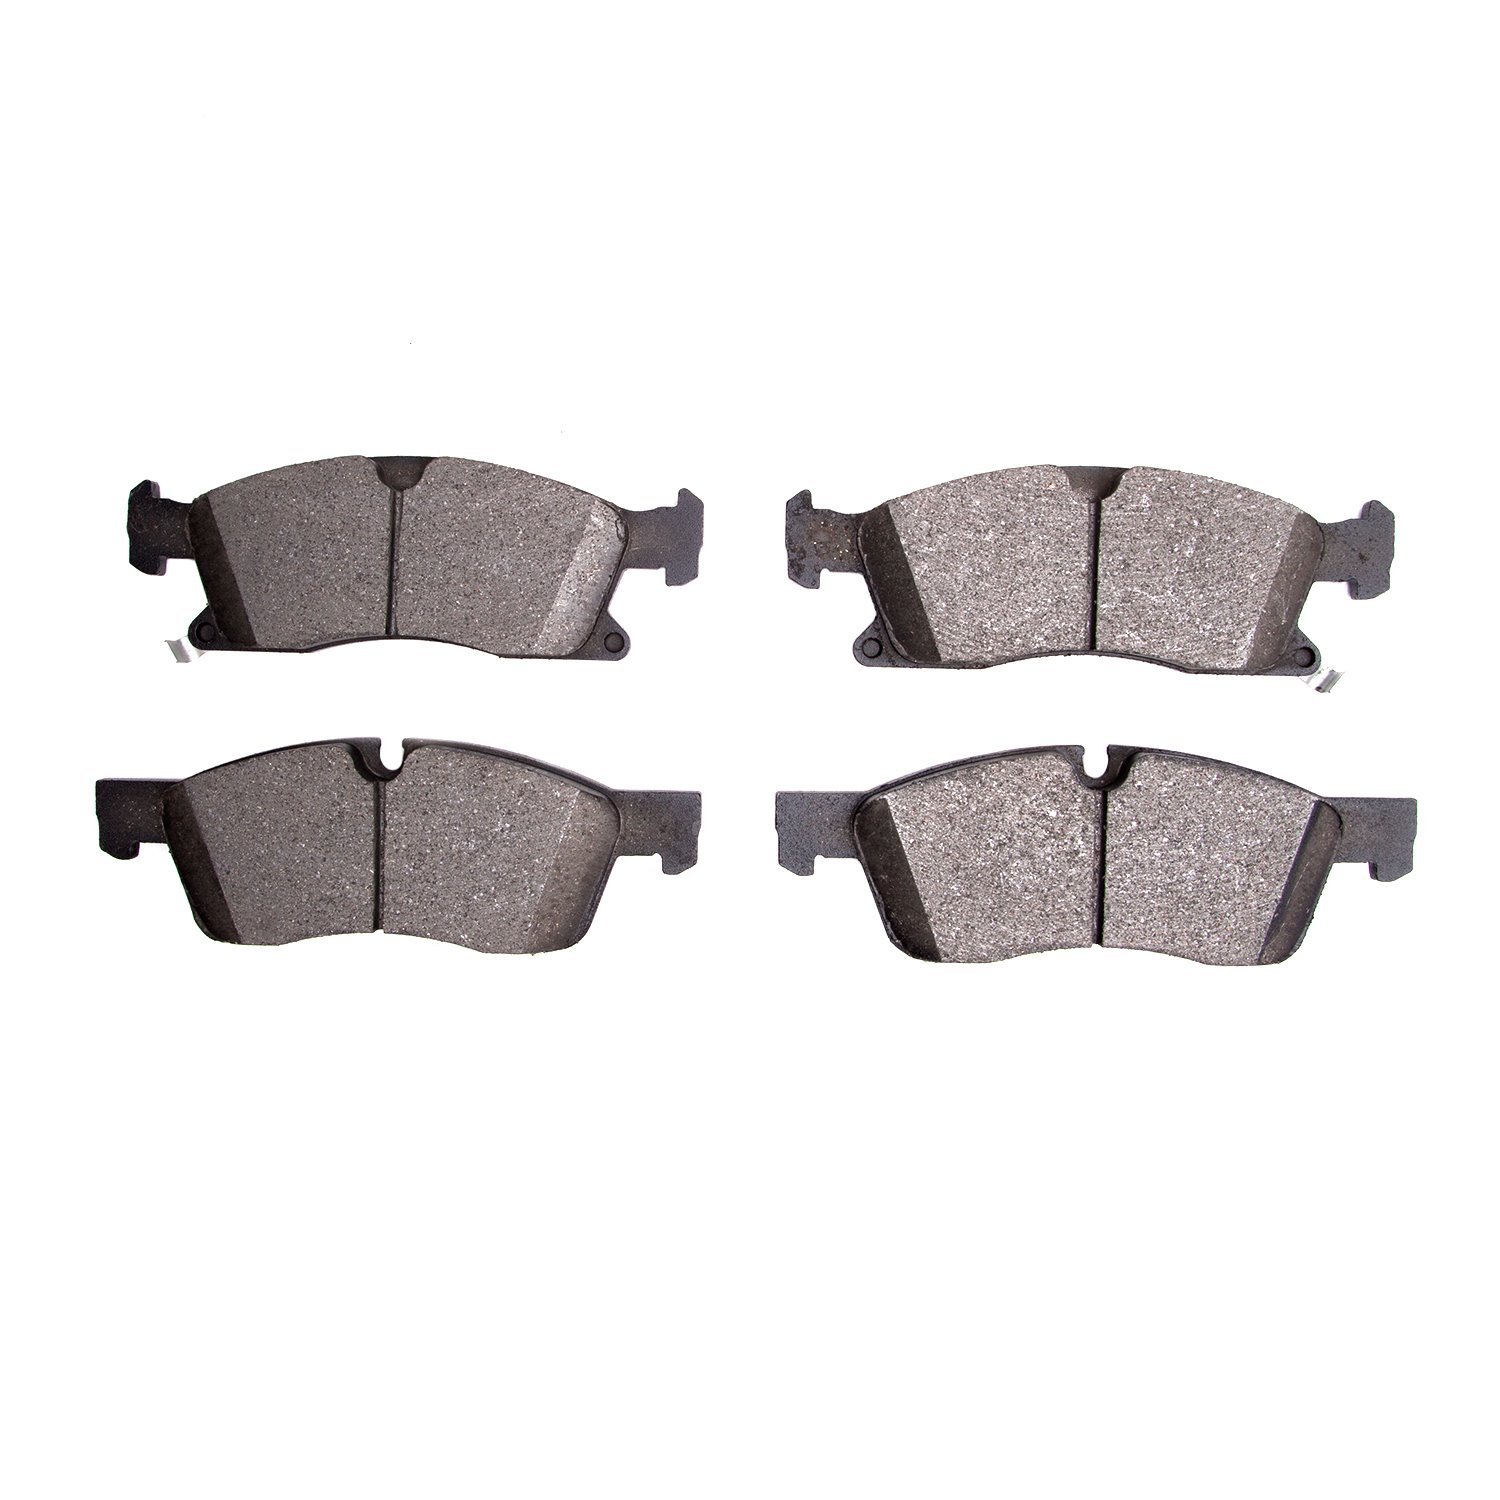 Performance Off-Road/Tow Brake Pads, Fits Select Fits Multiple Makes/Models, Position: Front